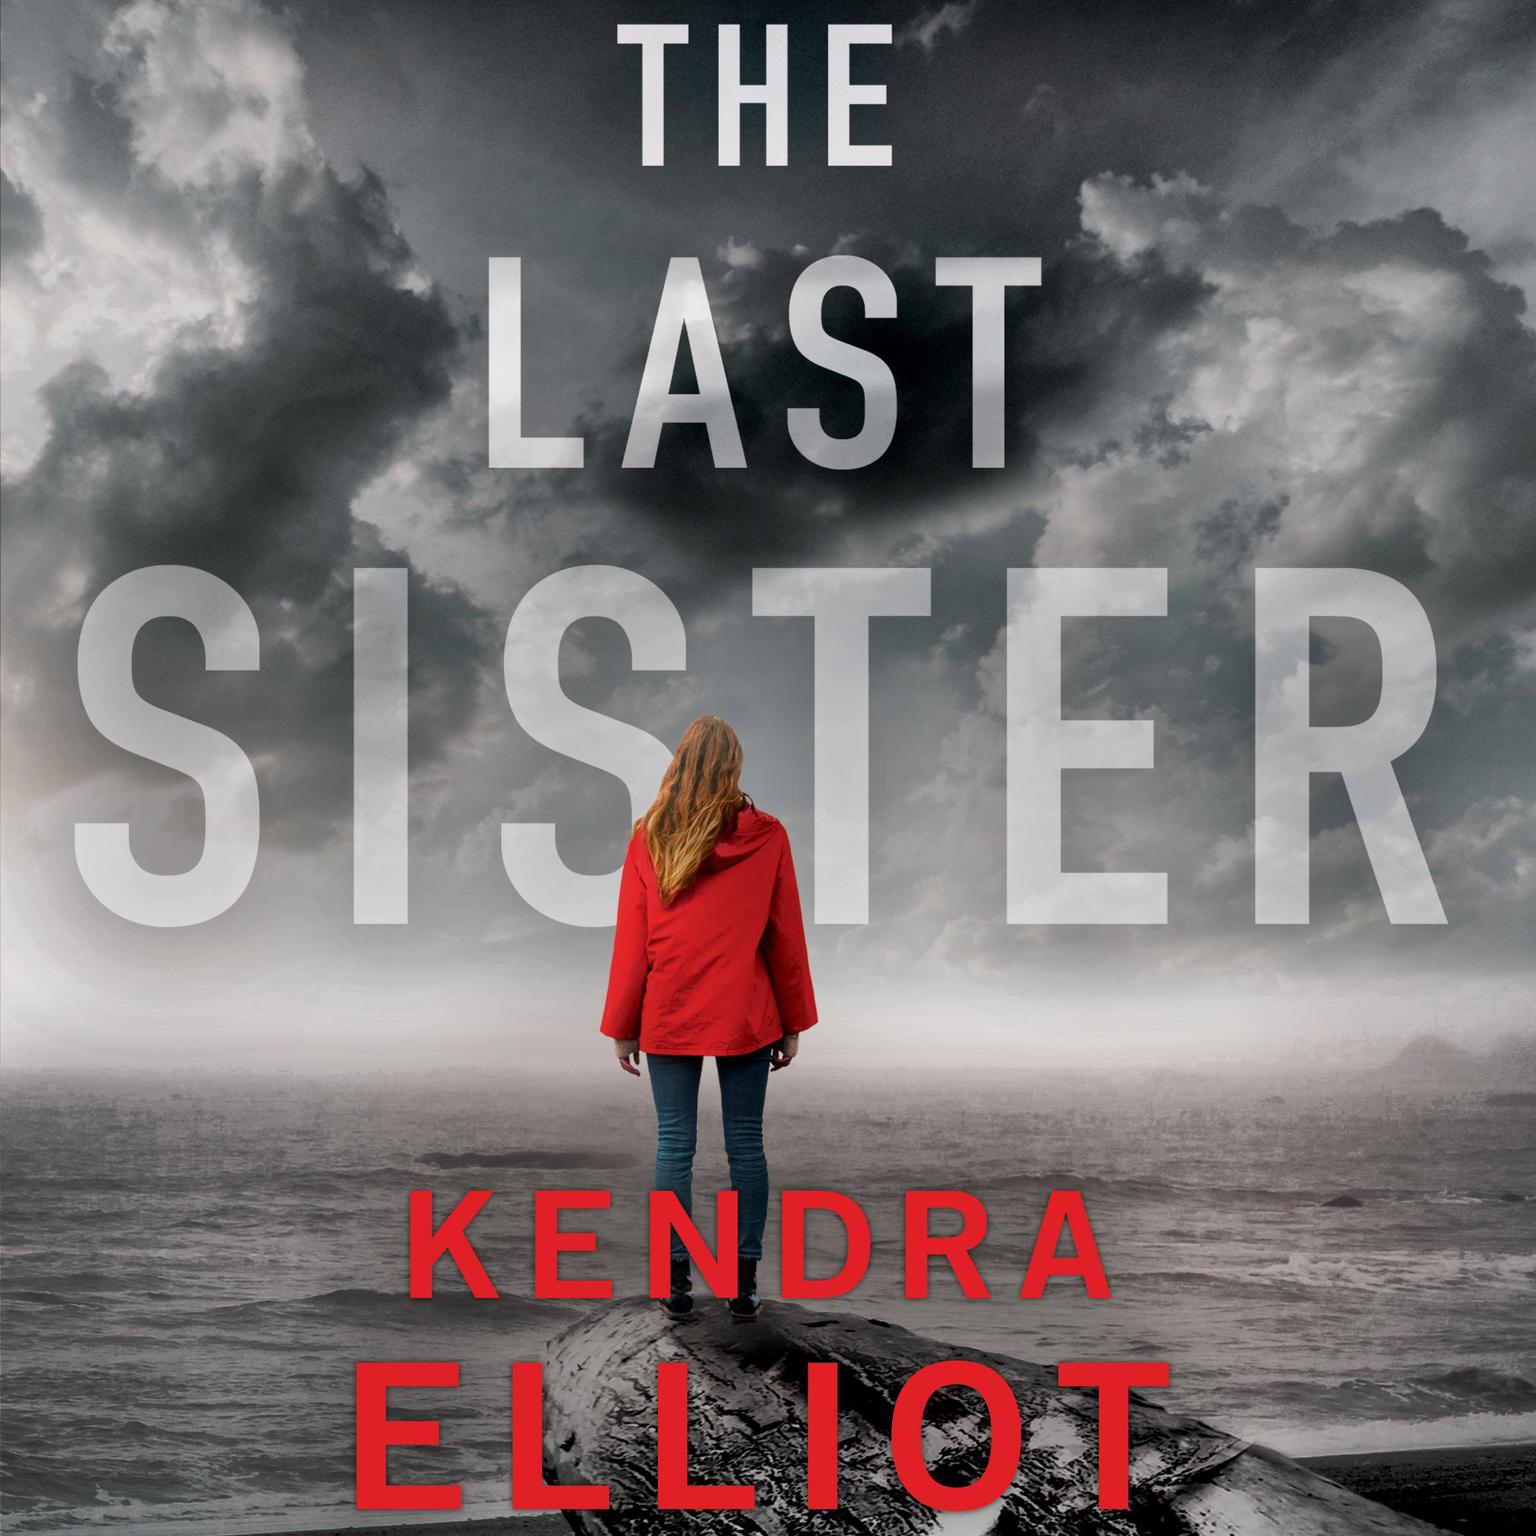 The Last Sister Audiobook By Kendra Elliot — Download Now